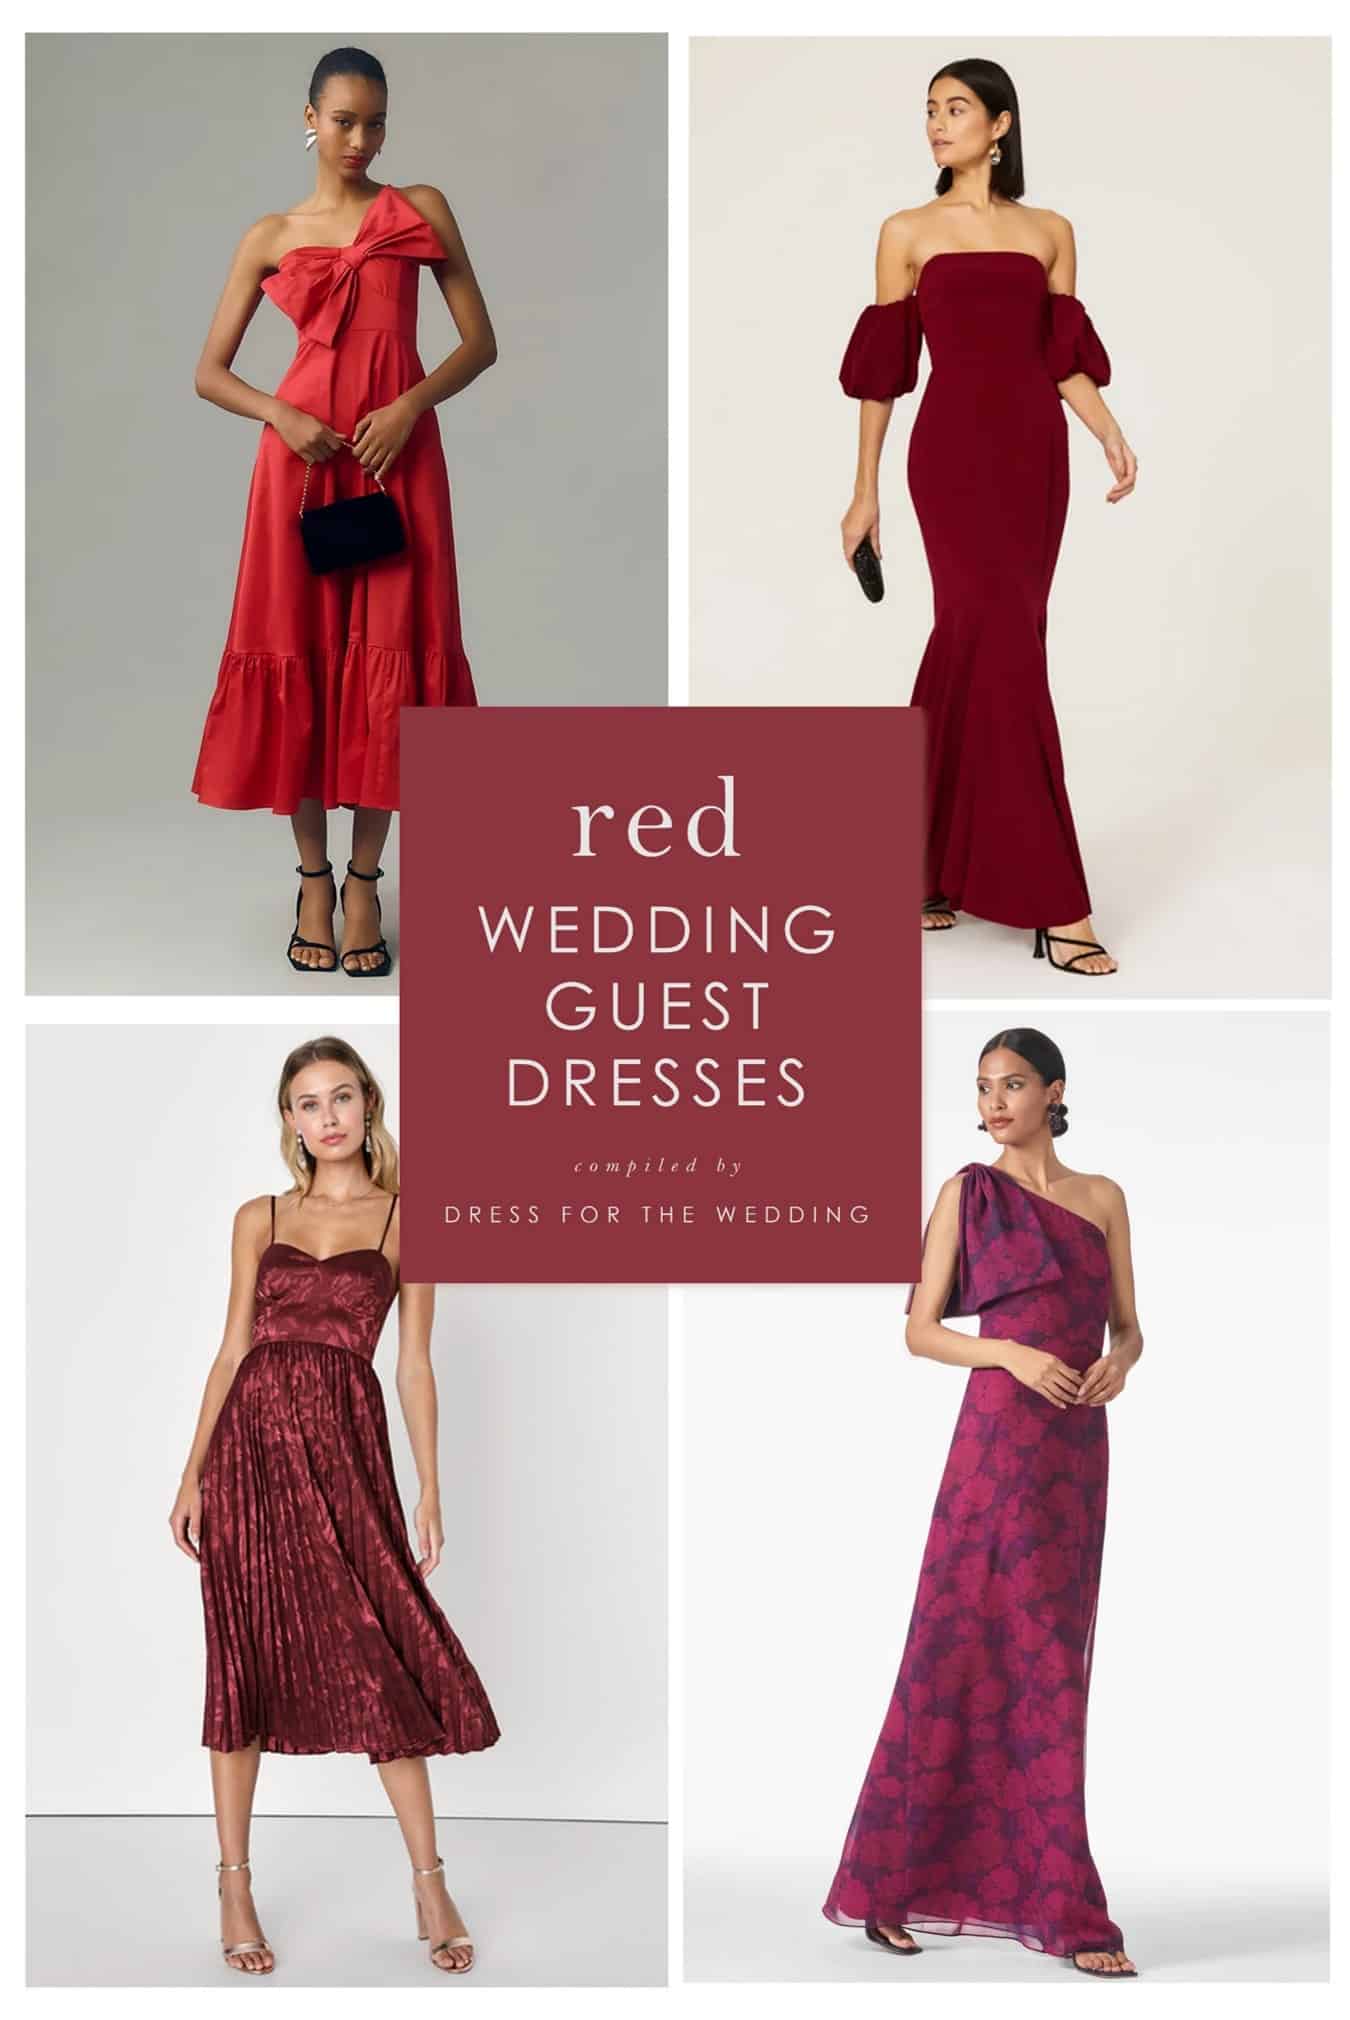 red dress at wedding as a guest